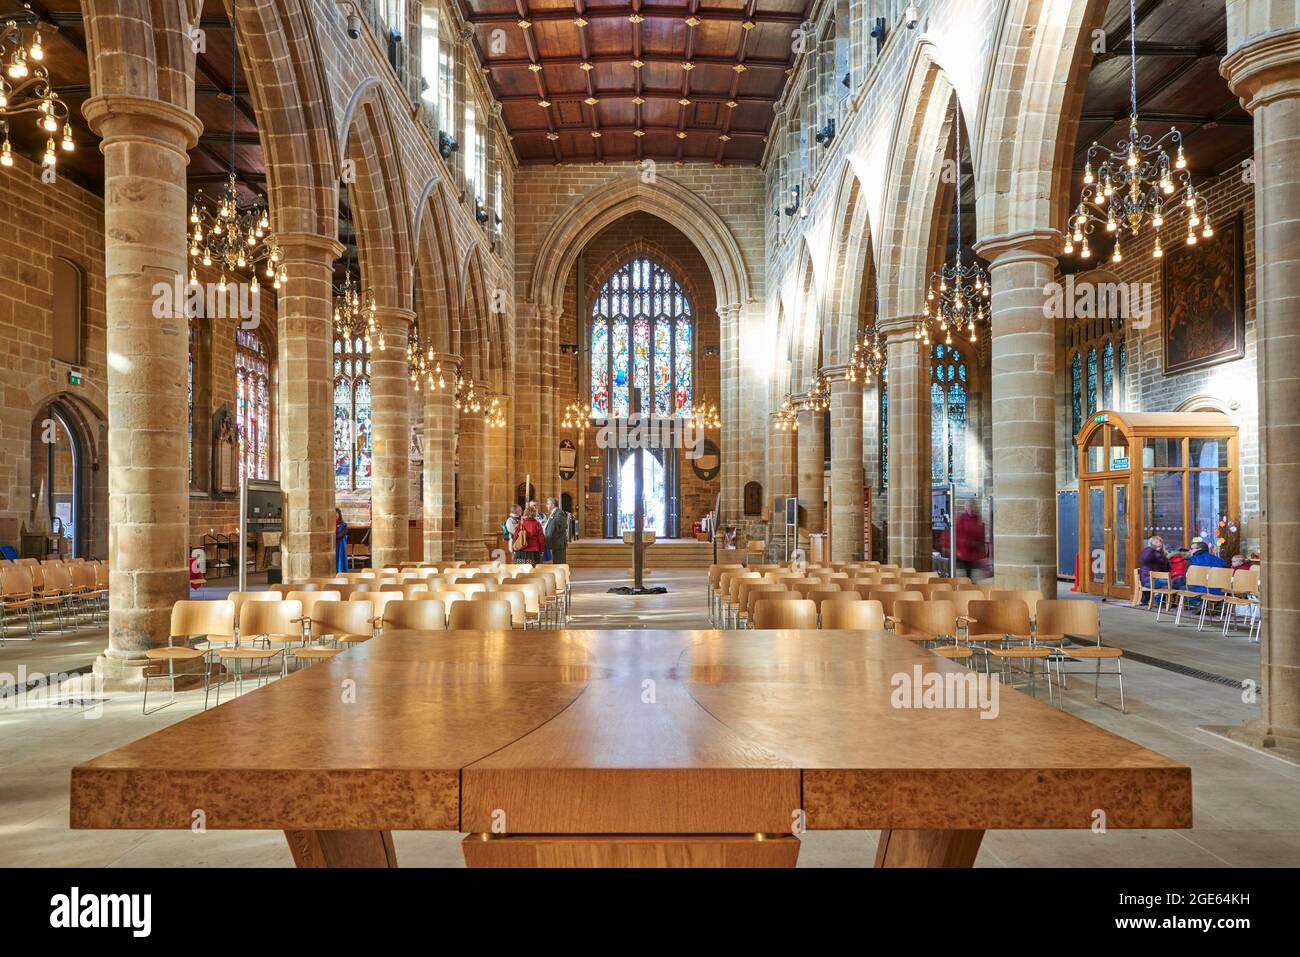 New modern alter at The refurbished interior of Wakefield Cathedral, West Yorkshire, northern England, UK Stock Photo